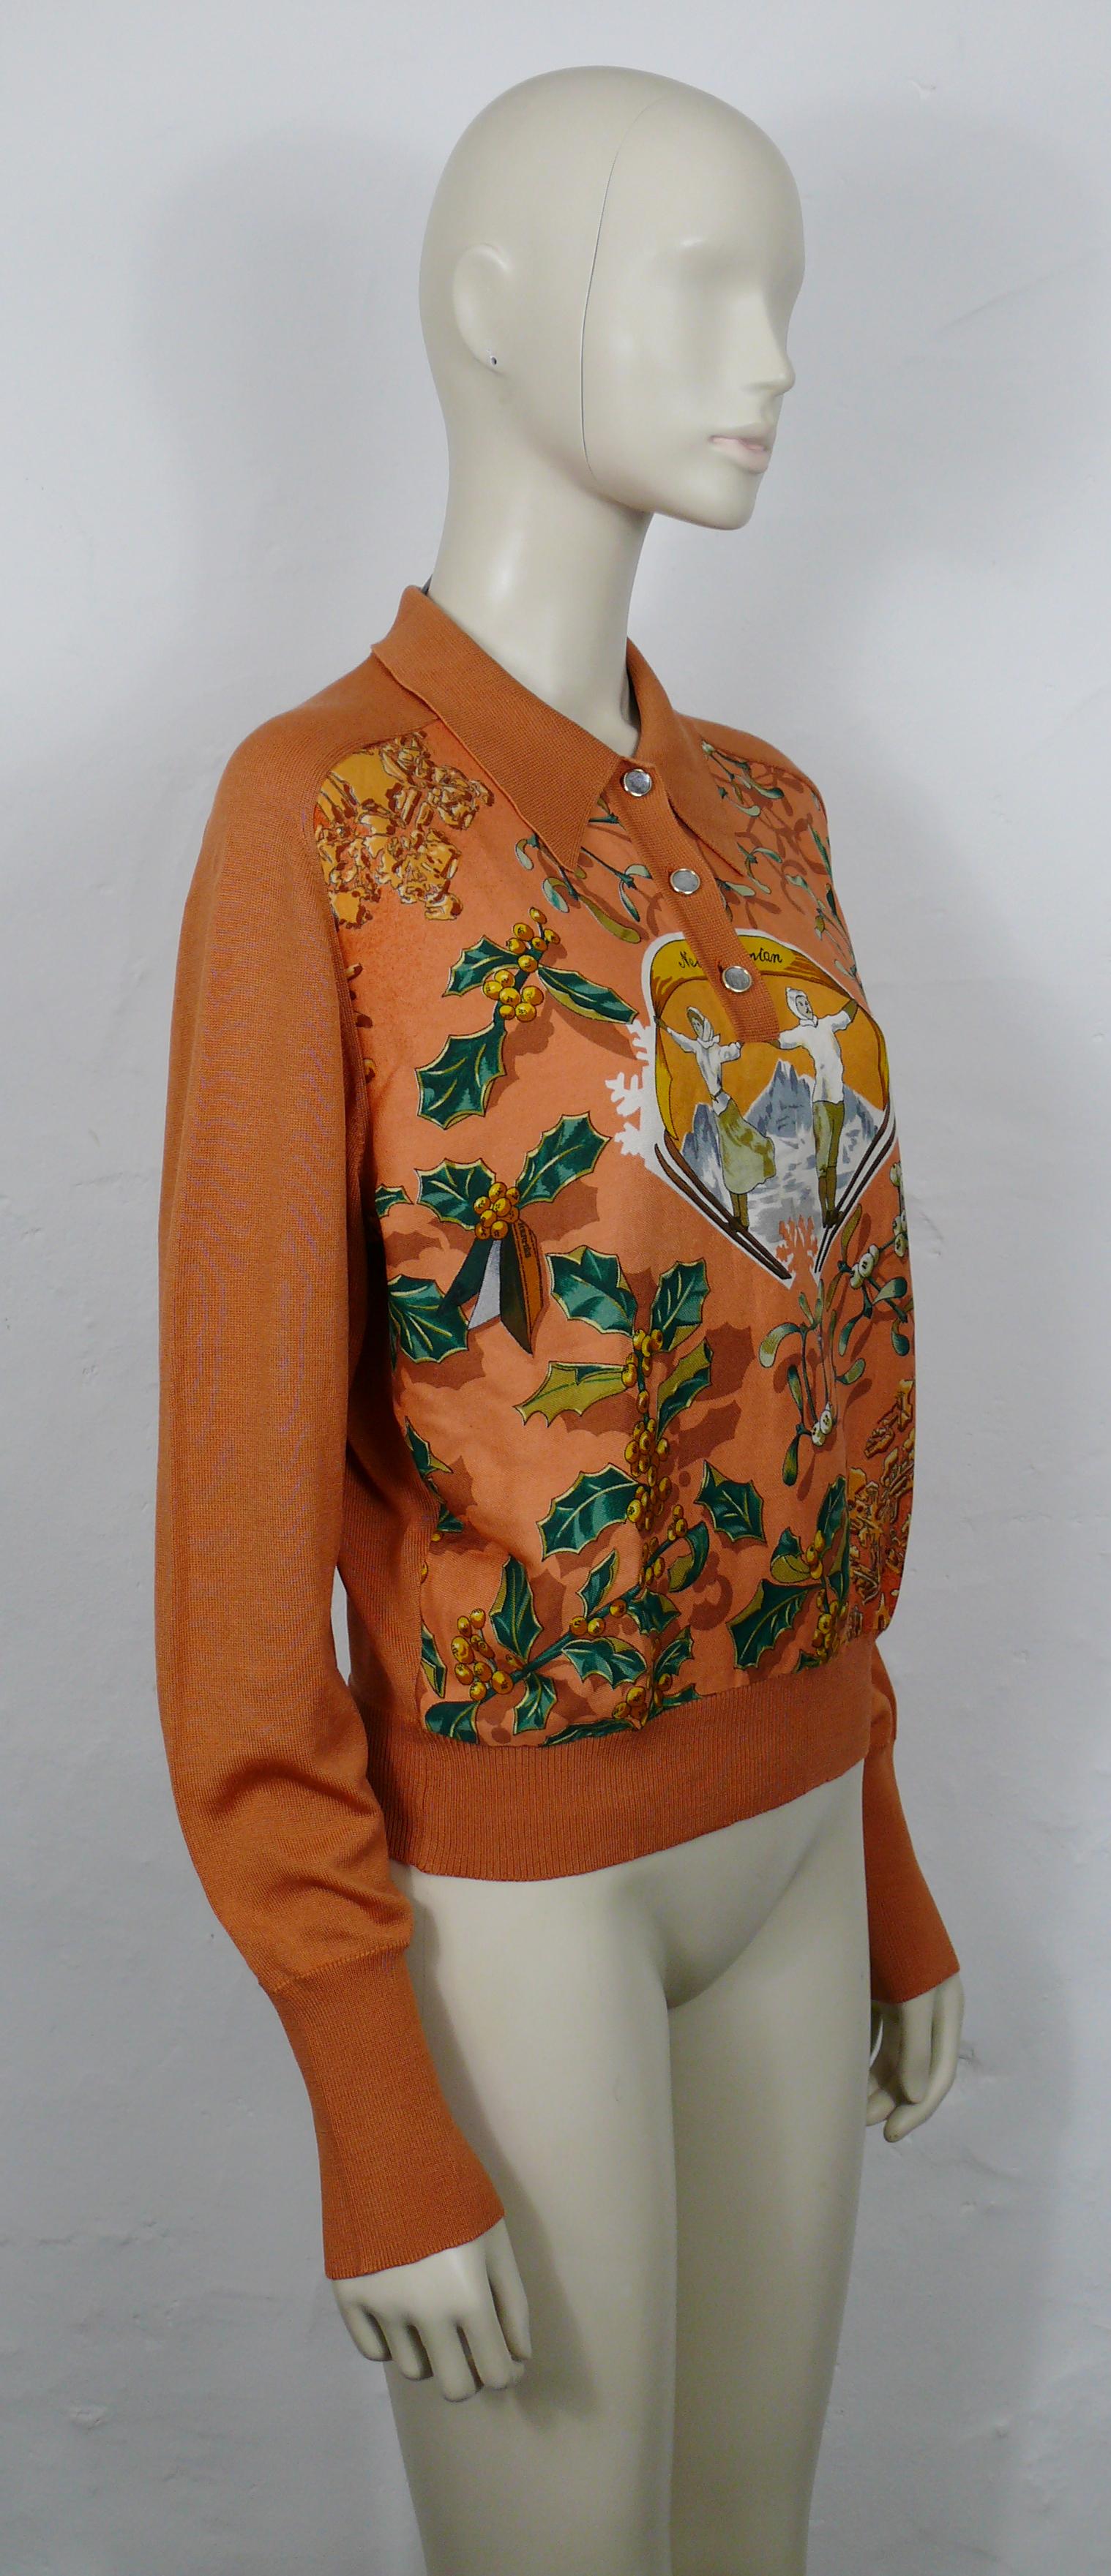 HERMES Paris vintage NEIGE D'ANTAN silk & cashmere sweater.

Label reads HERMES PARIS EXCLUSIF Made in France.

Size tag reads : 42.
Please refer to measurements.

Composition label reads : Back 65 % Cashmere - 35 % Silk / Front 100 %